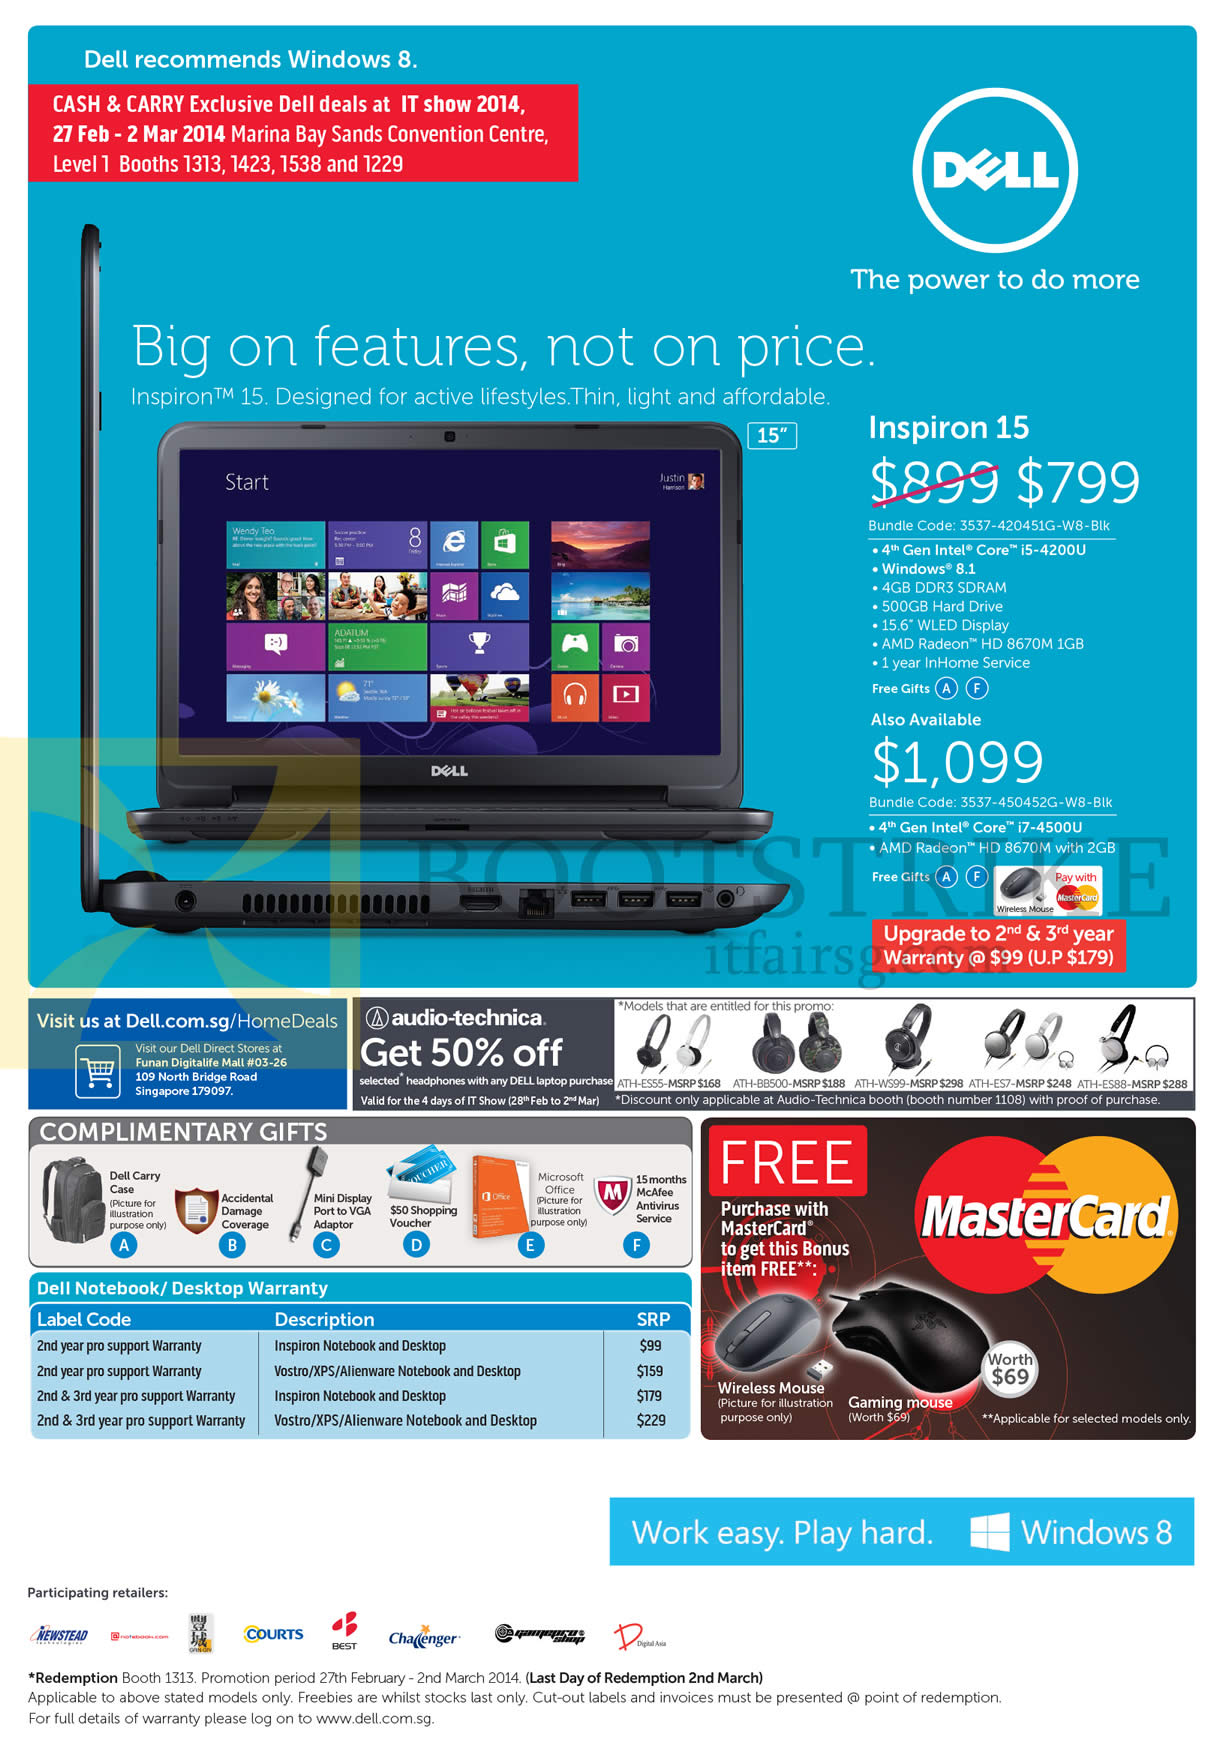 IT SHOW 2014 price list image brochure of Dell Inspiron 15 Notebook